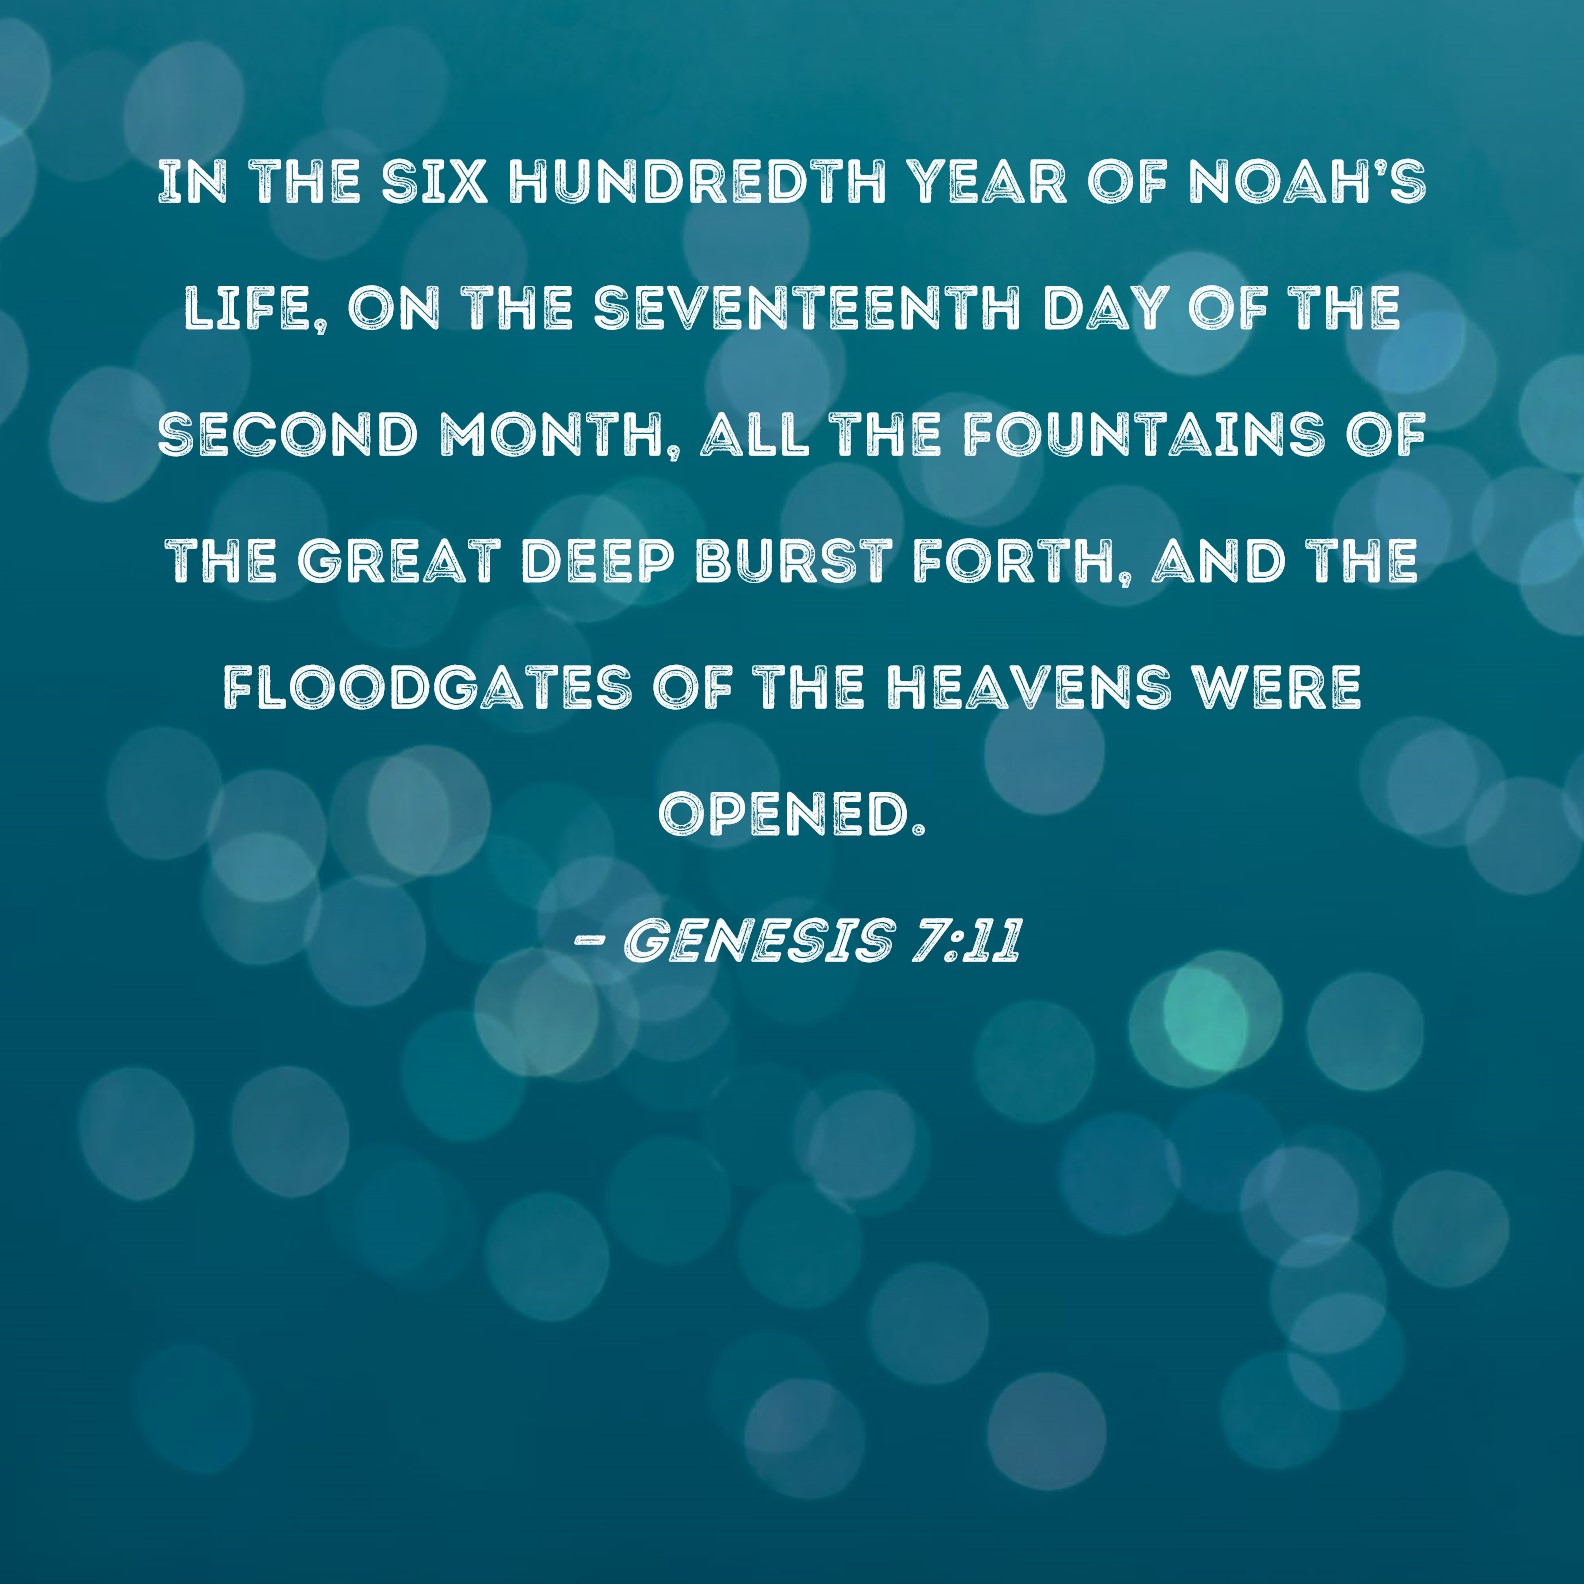 Genesis 711 In the six hundredth year of Noah's life, on the